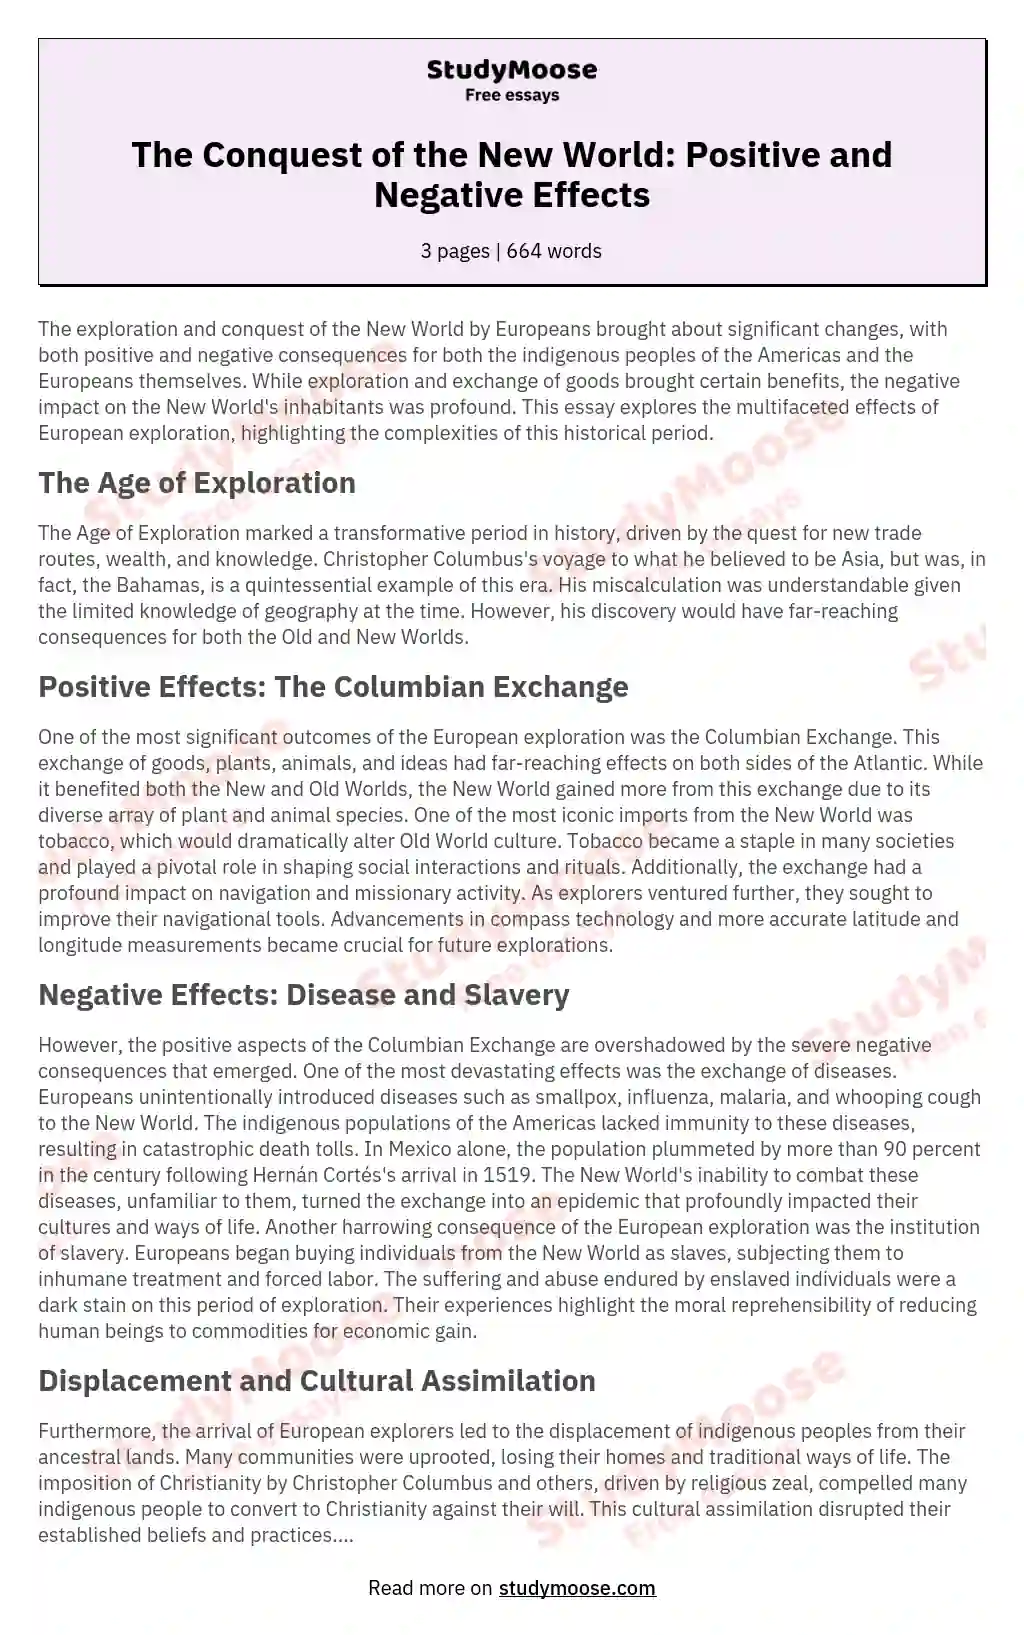 The Conquest of the New World: Positive and Negative Effects essay